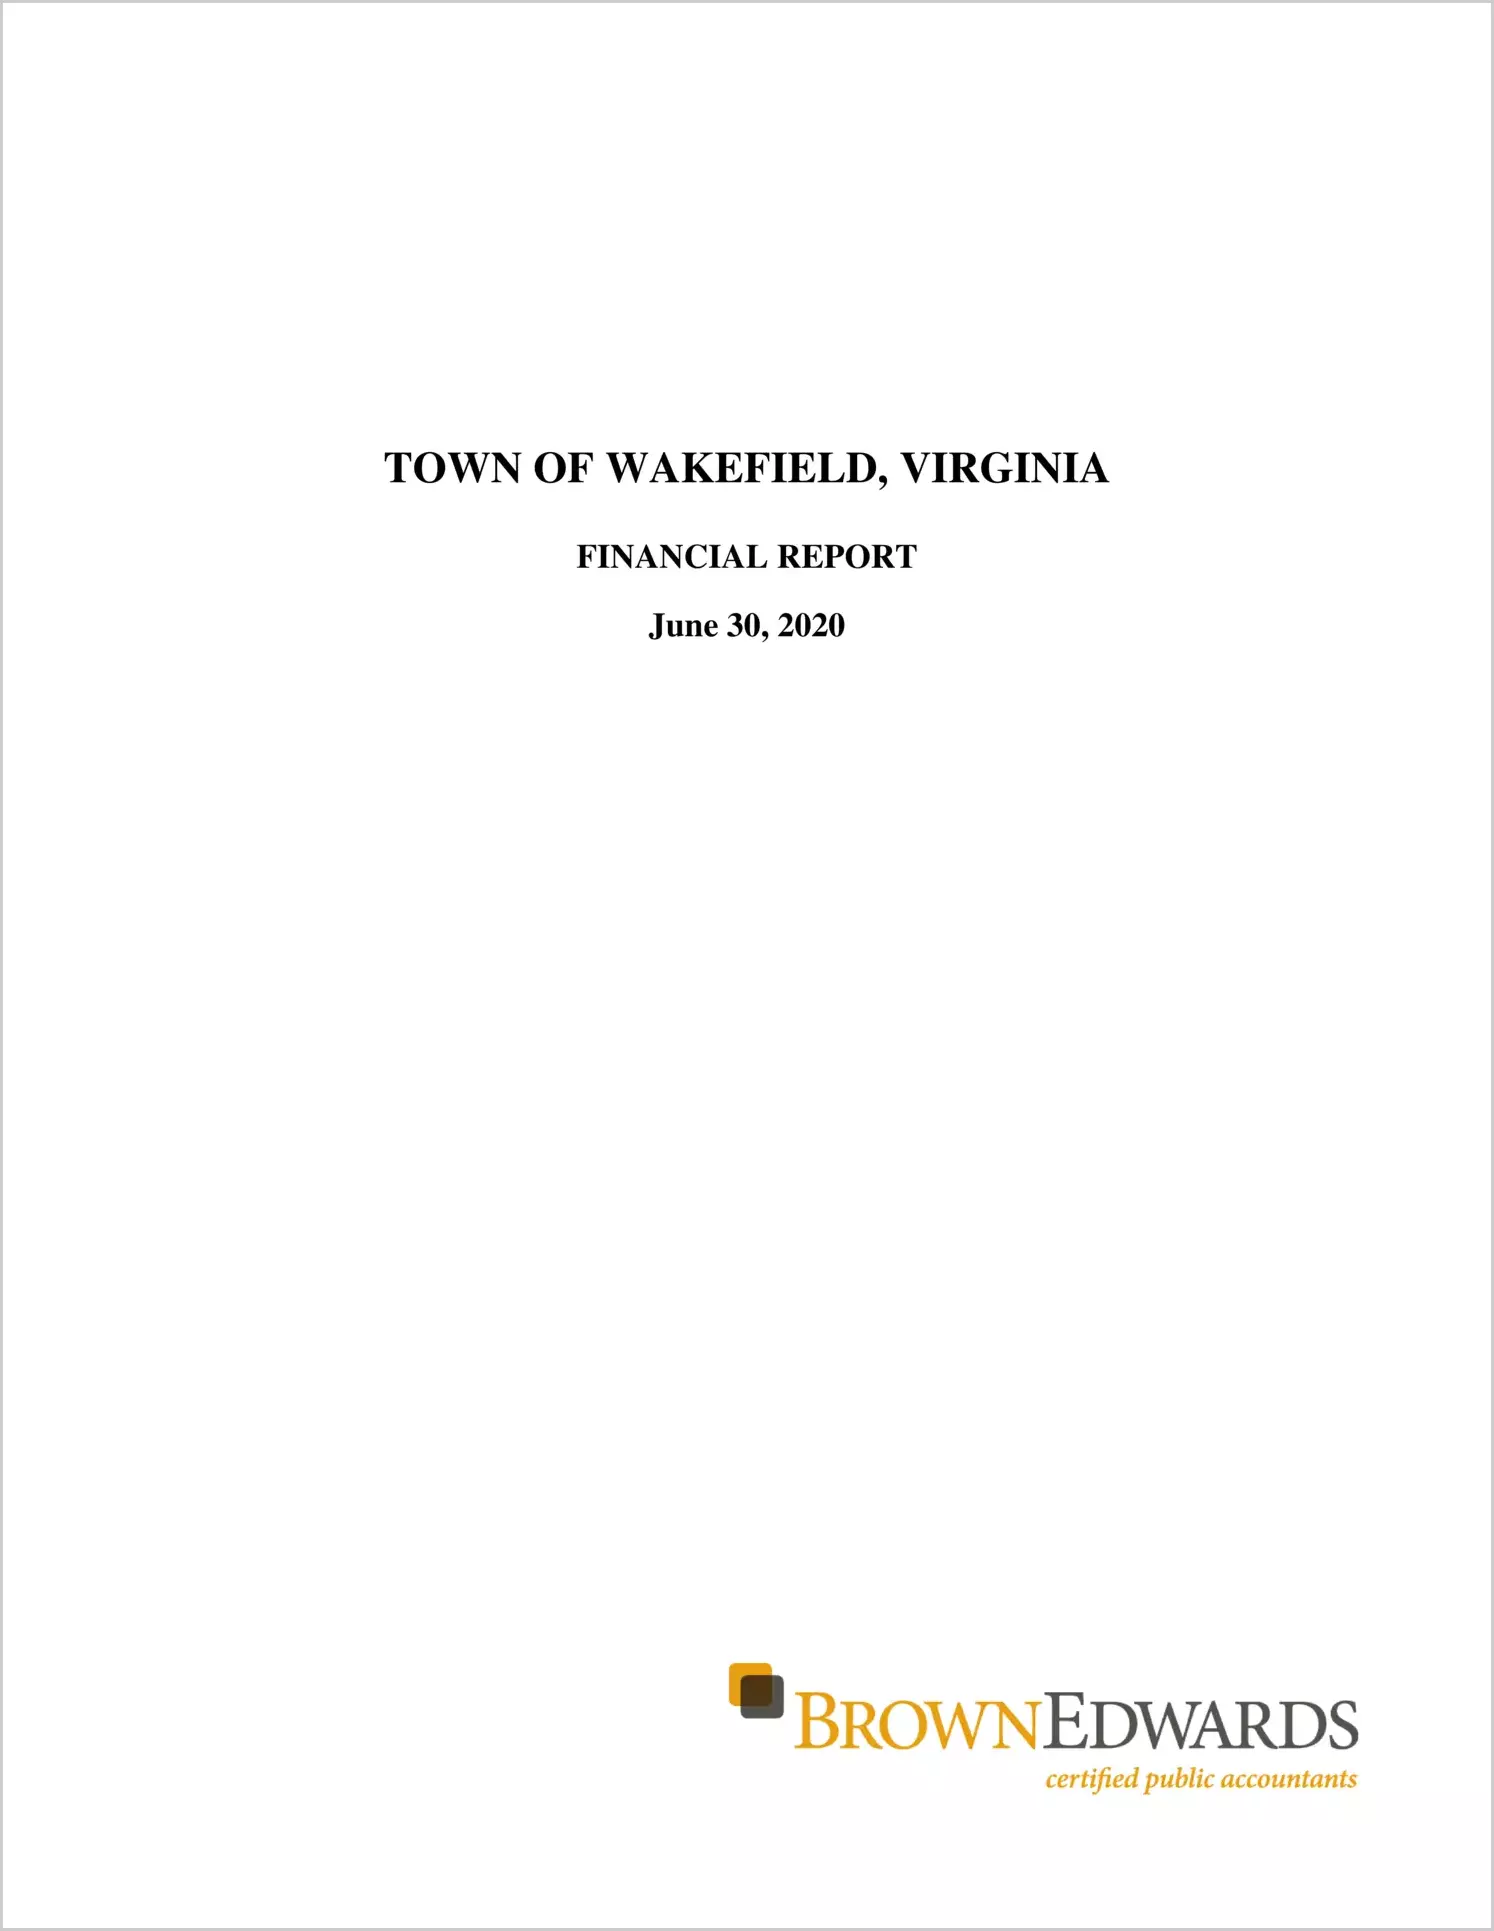 2020 Annual Financial Report-Small Town for Town of Wakefield